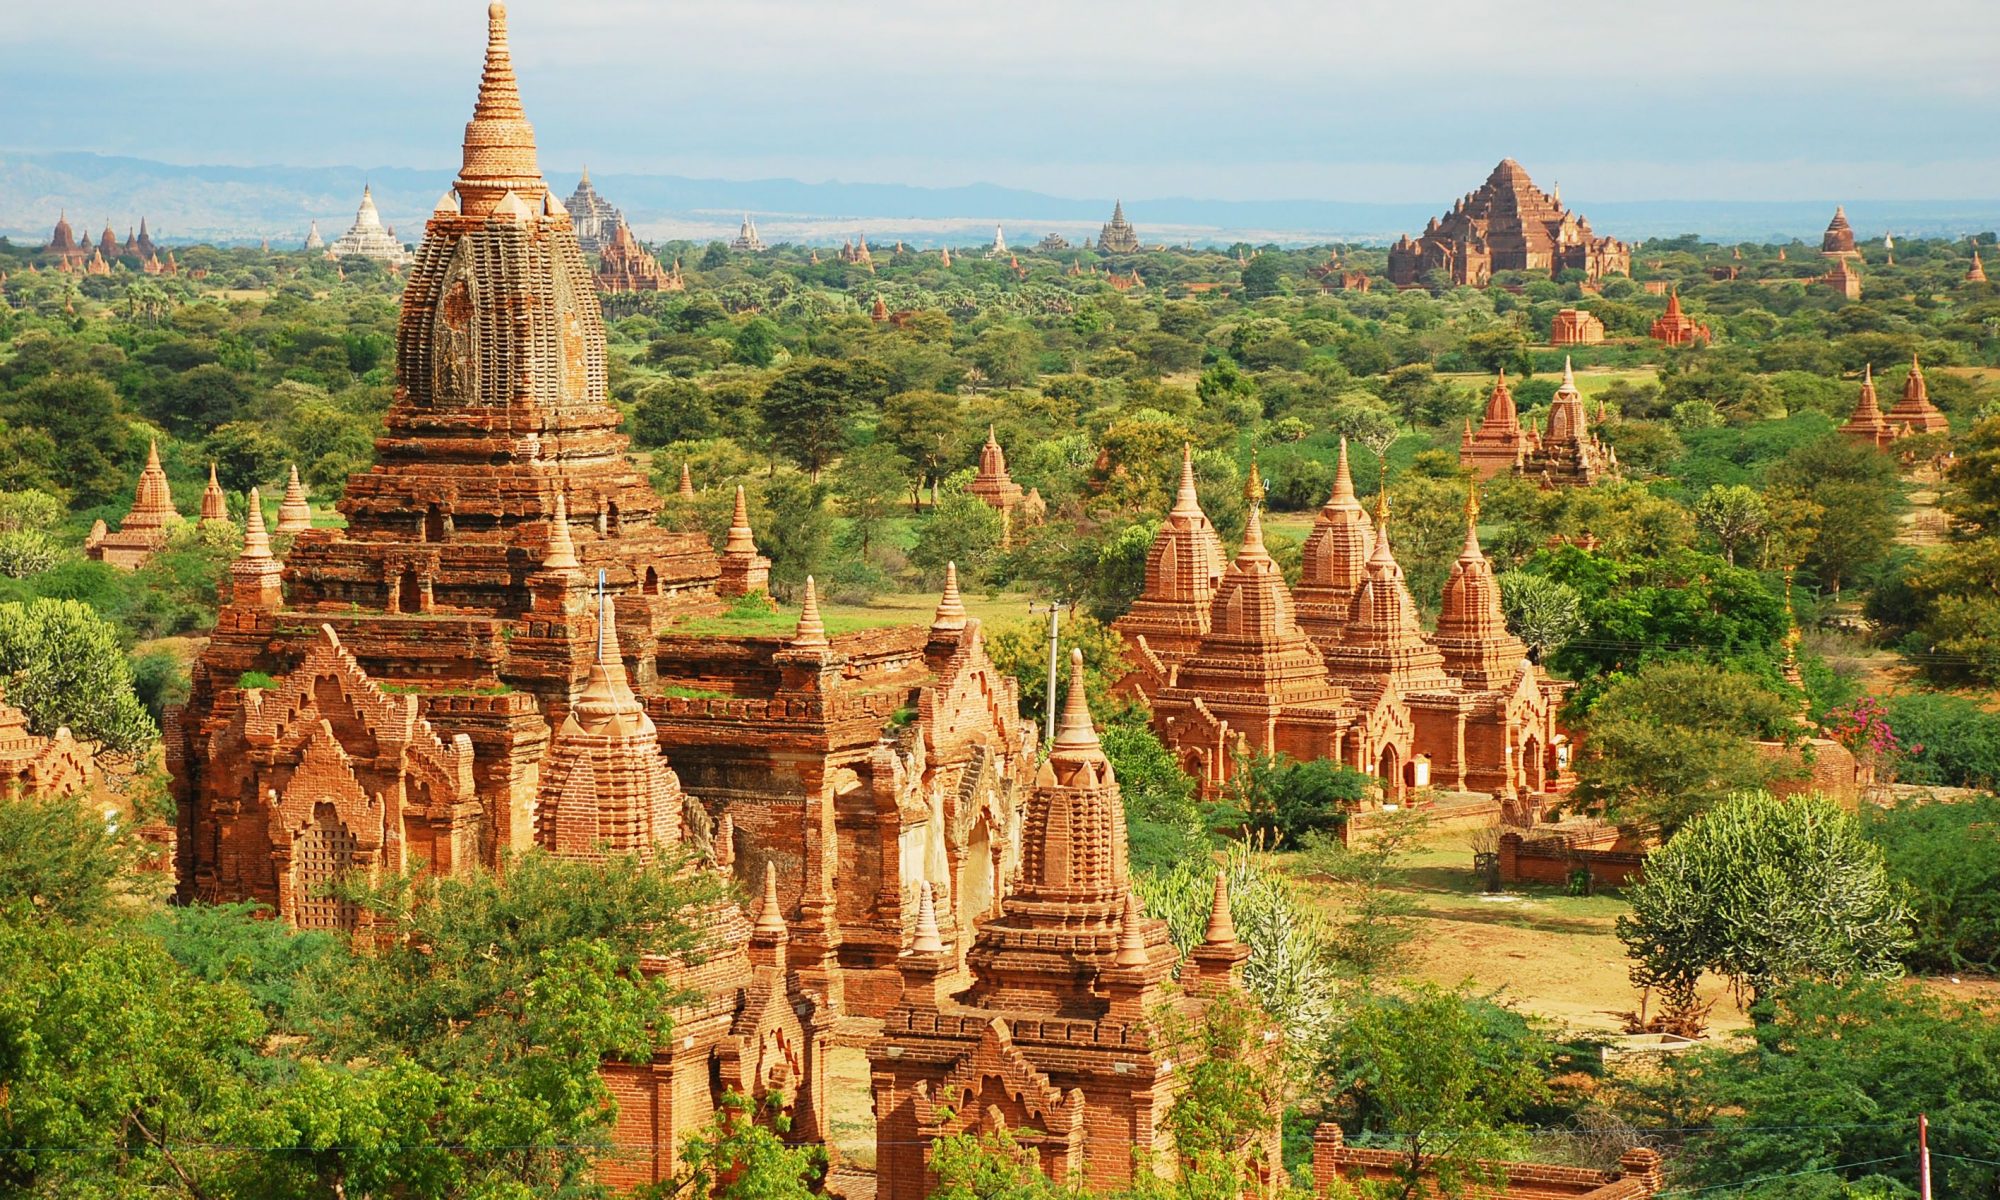 Experts visit to Bagan for UNESCO listing